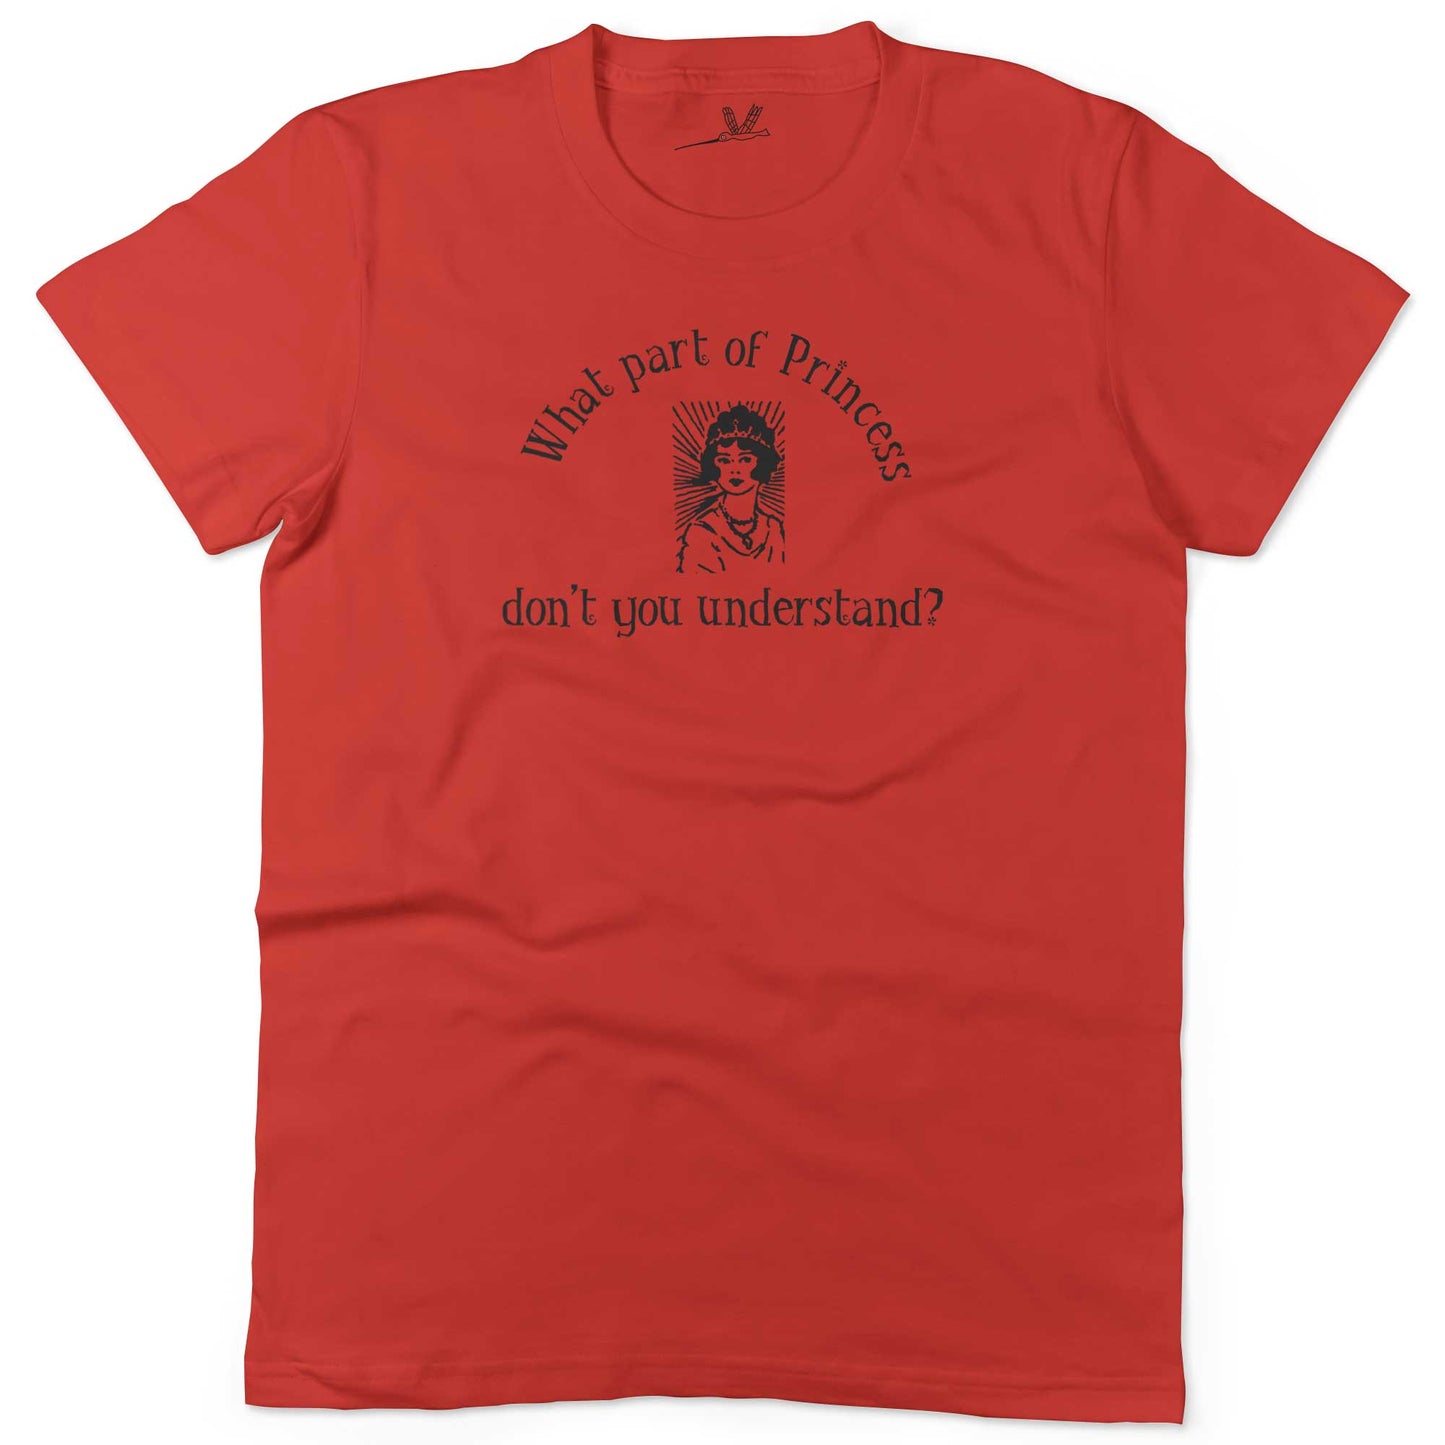 What Part Of Princess Don't You Understand? Unisex Or Women's Cotton T-shirt-Red-Woman